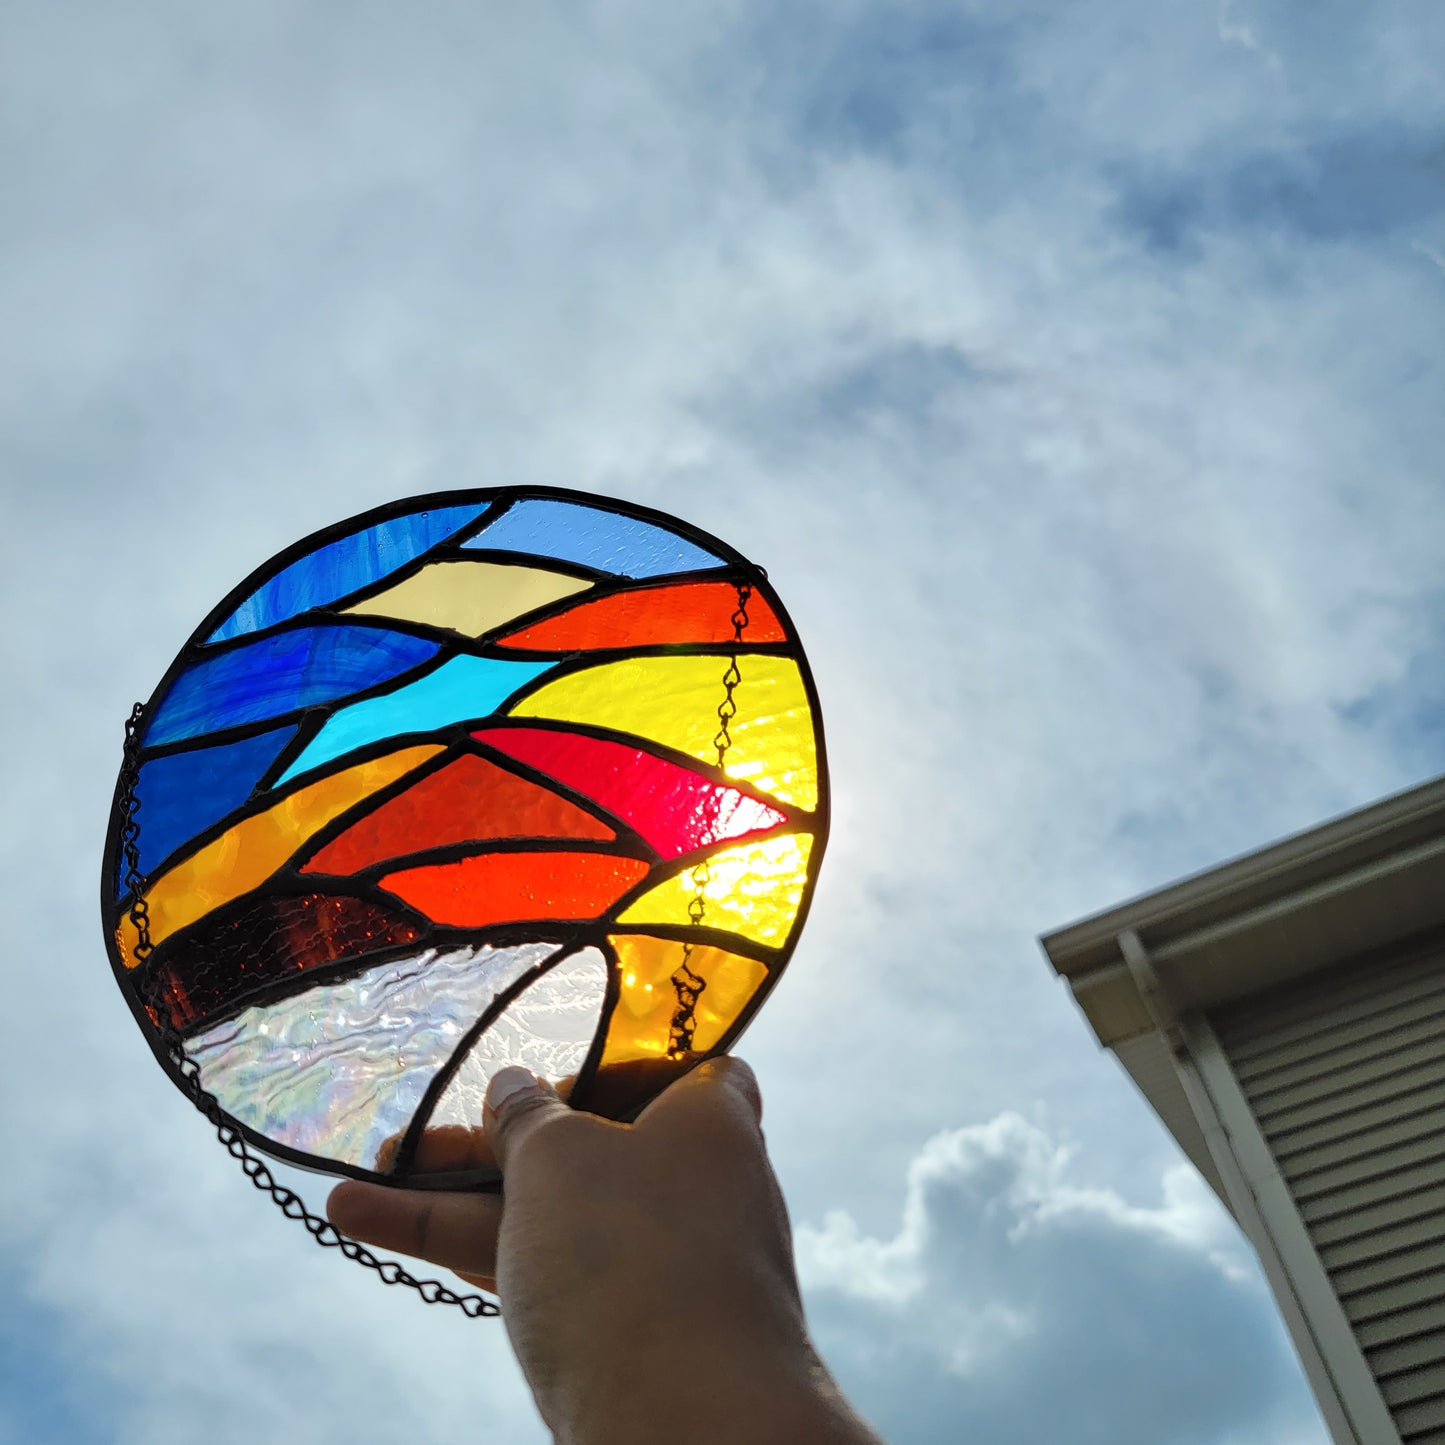 Stained glass round shape art